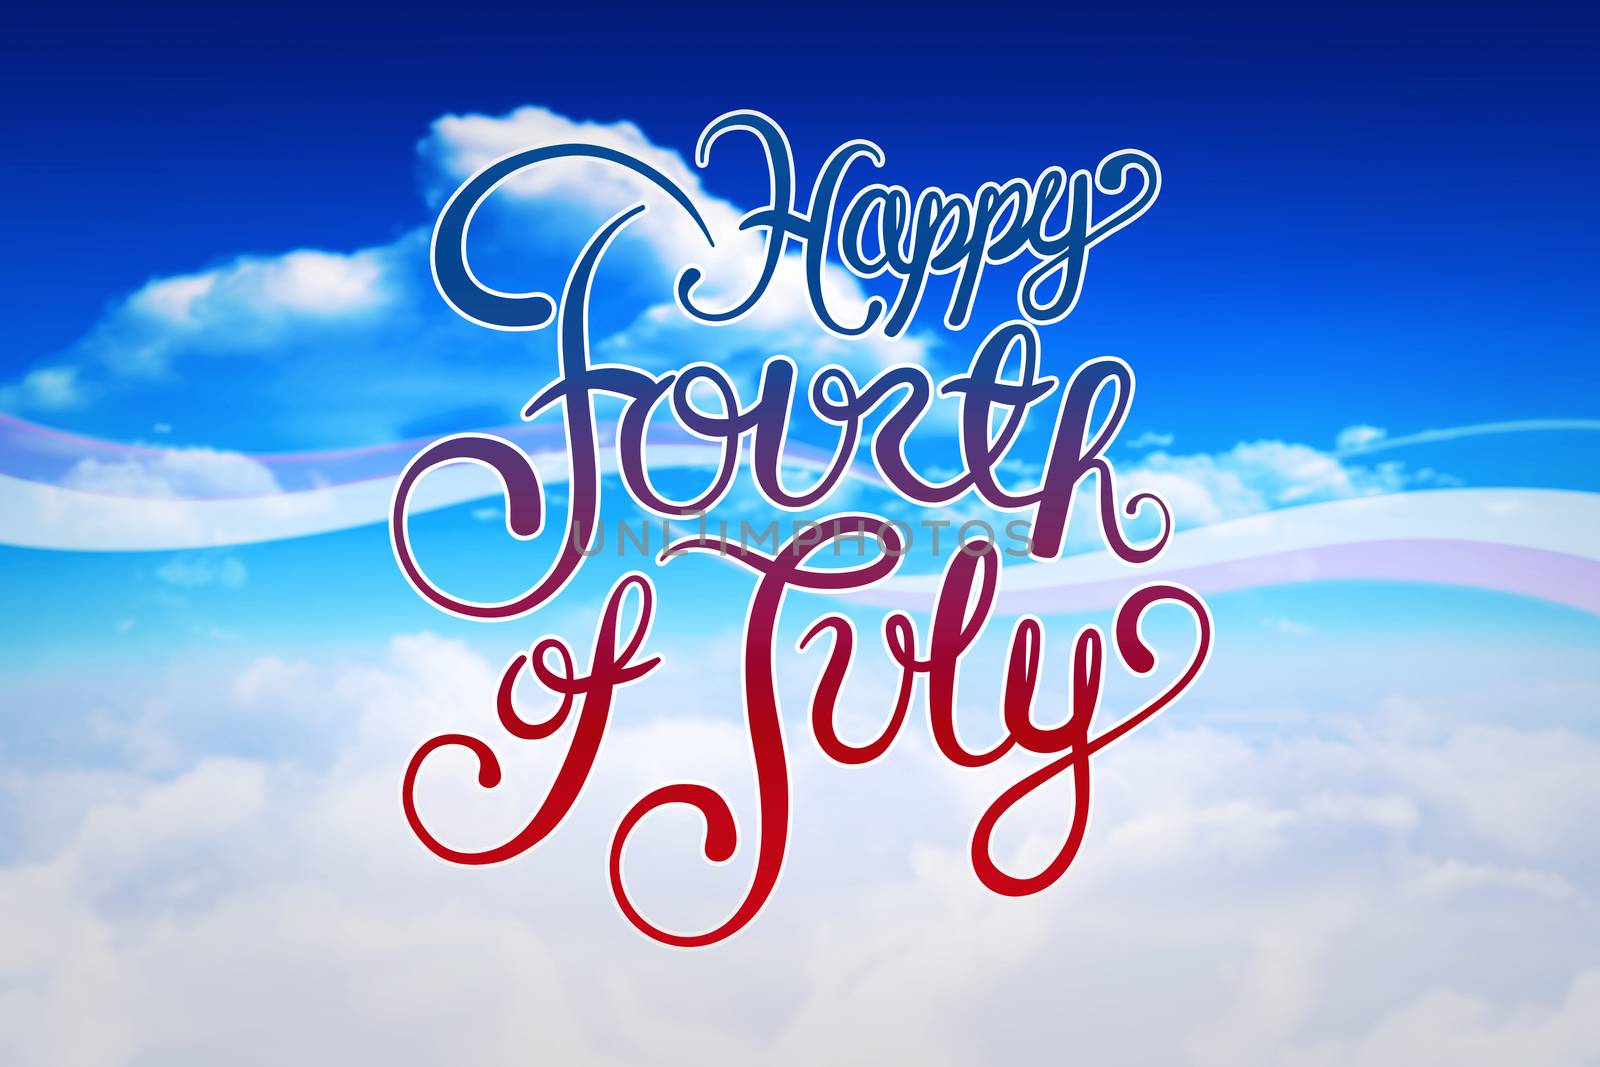 Independence day graphic against bright blue sky with clouds